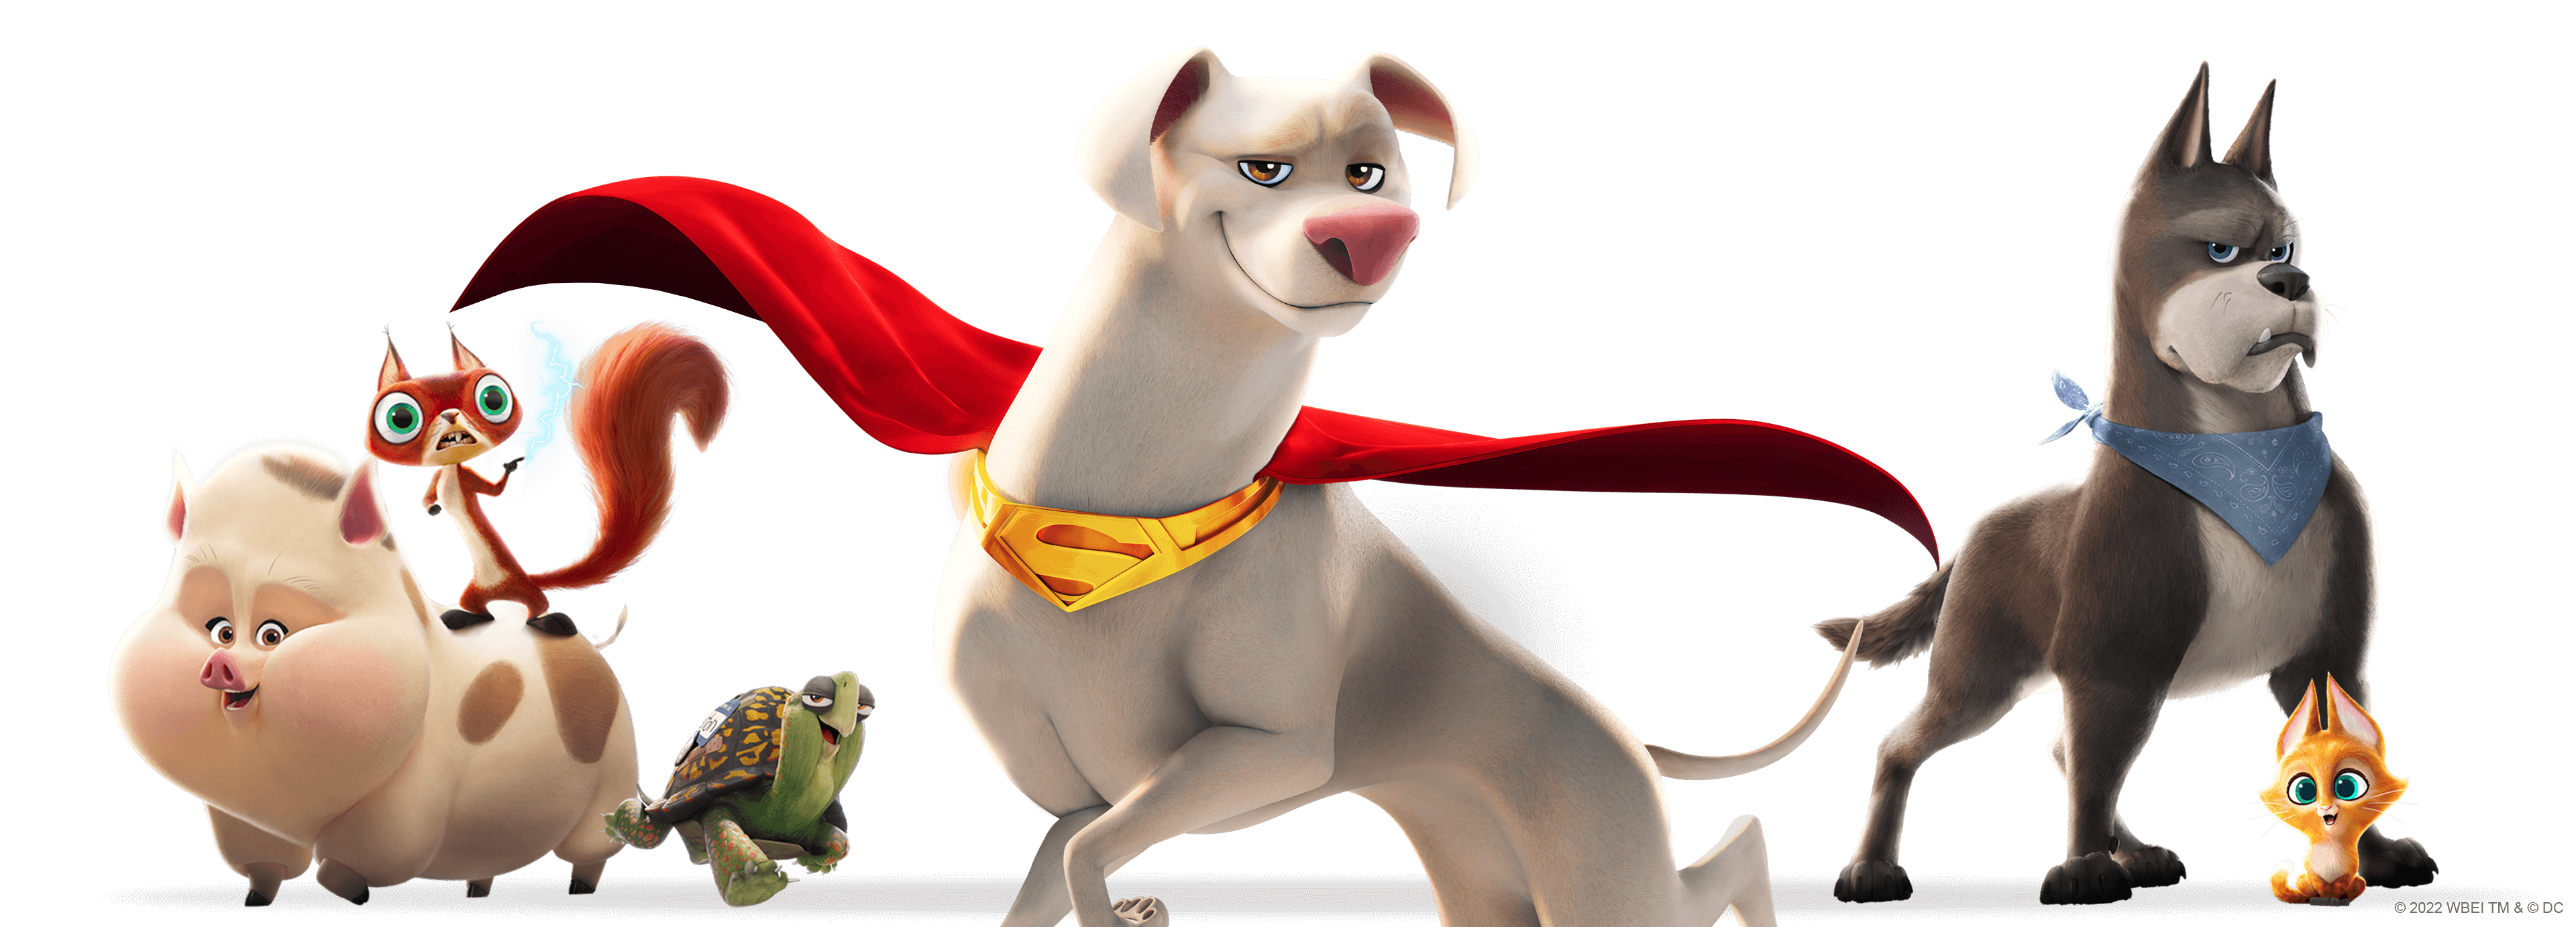 DC League of Superpets | Videos and Downloads | Cartoon Network